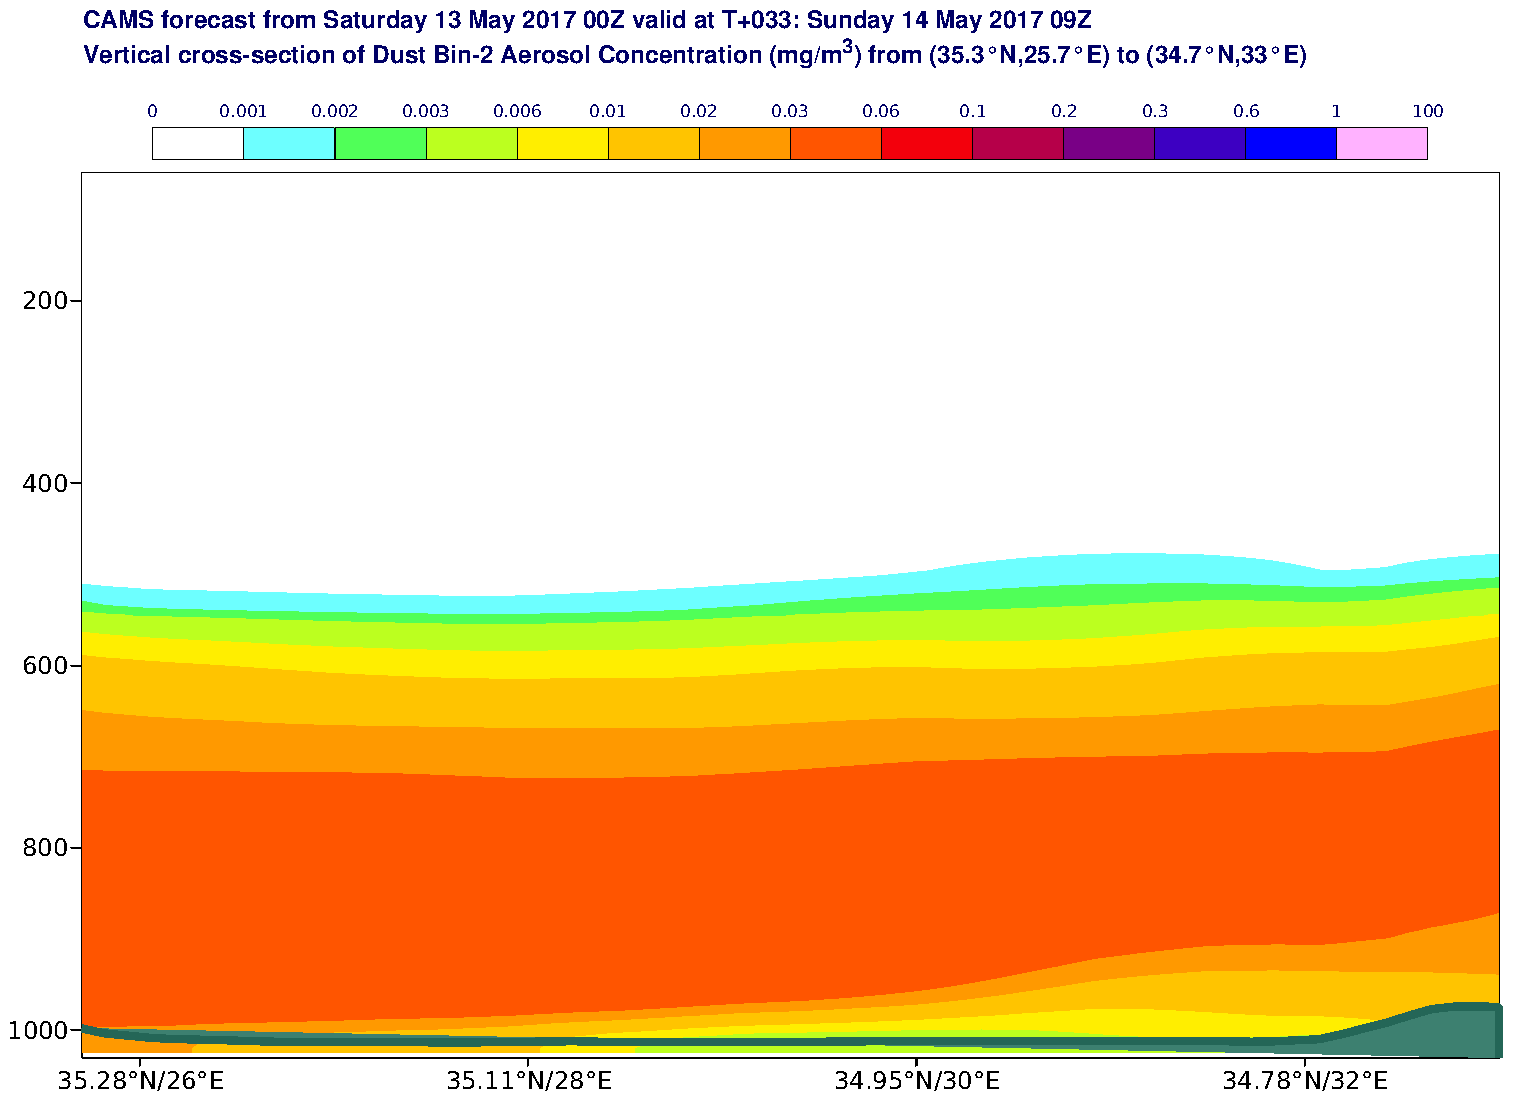 Vertical cross-section of Dust Bin-2 Aerosol Concentration (mg/m3) valid at T33 - 2017-05-14 09:00